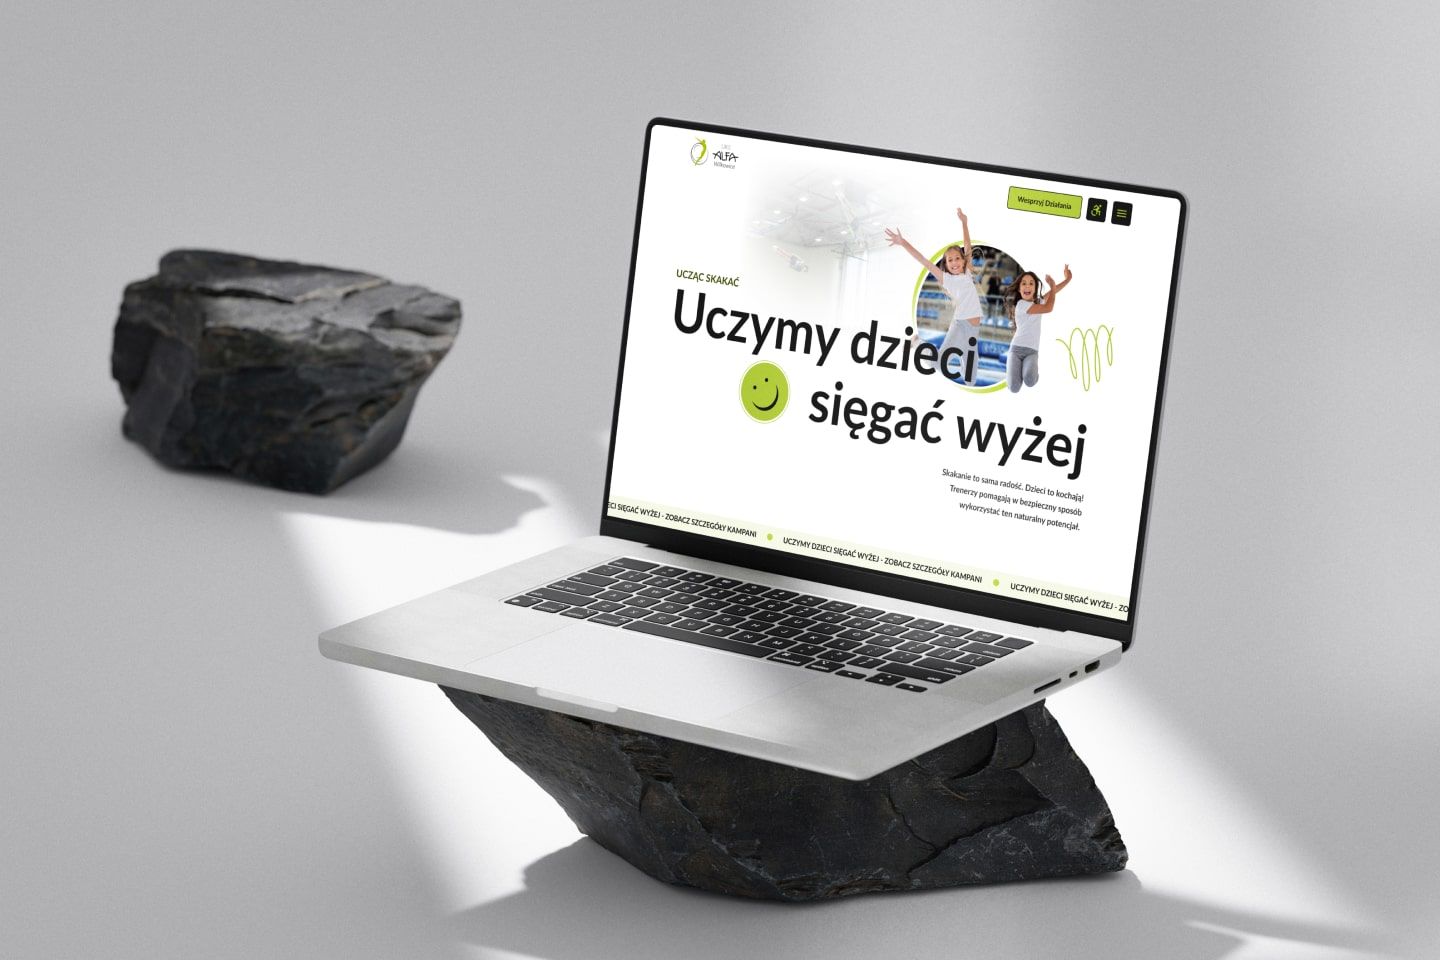 Home Page Banner Mockup on laptop view: By teaching trampoline jumping - we teach children to achieve more